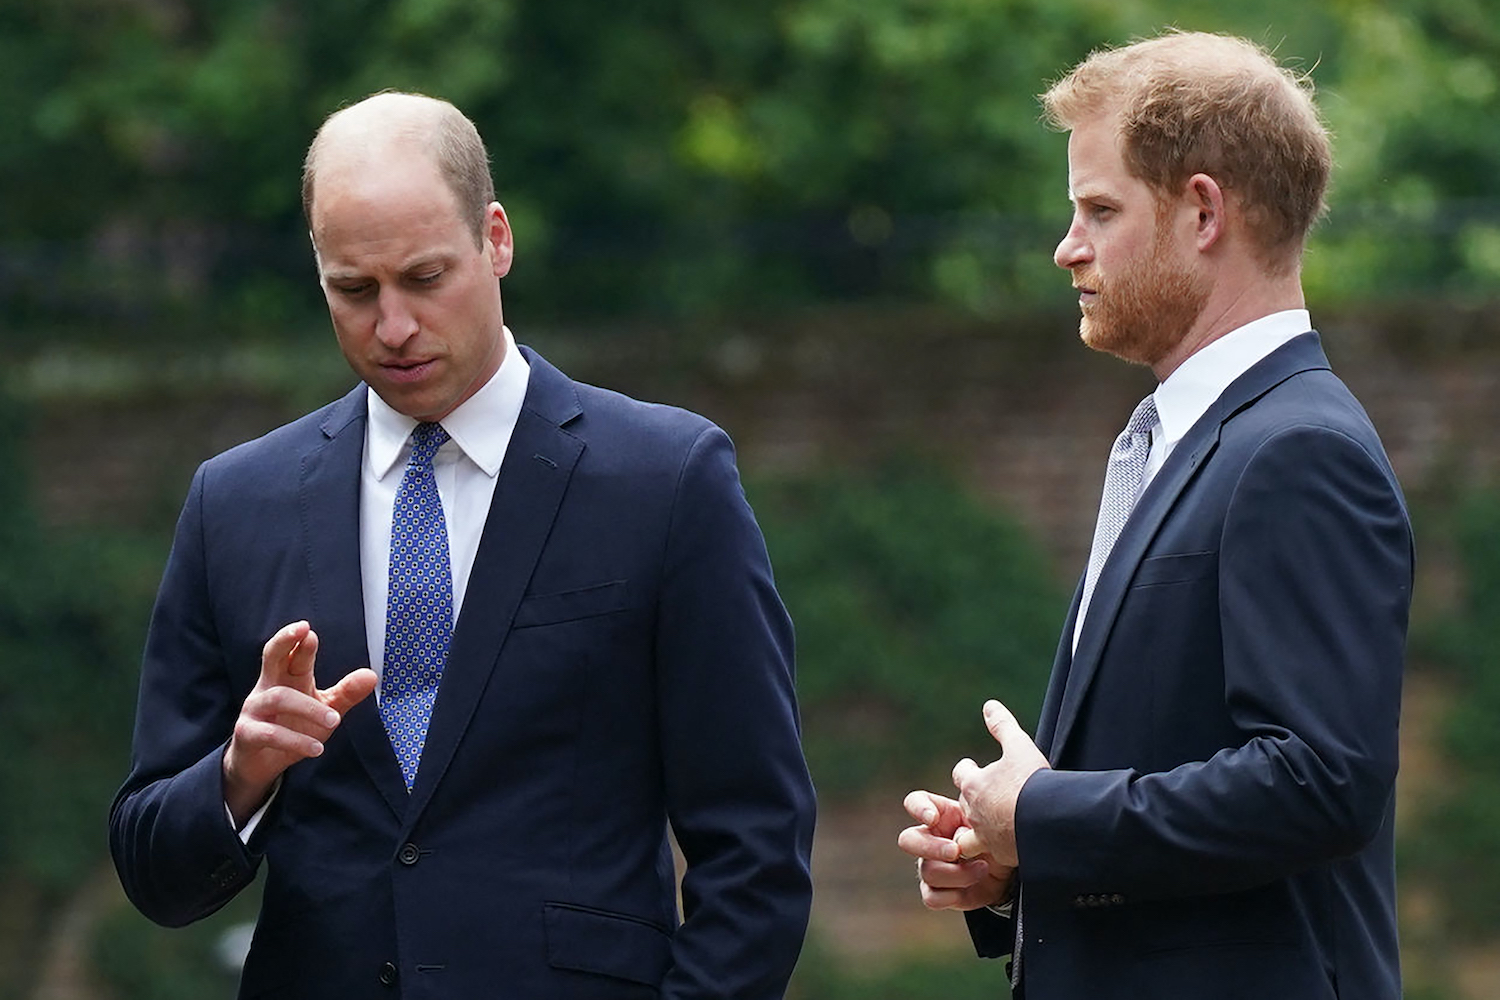 Prince William and Prince Harry at the unveiling of a statue of their mother, Princess Diana at The Sunken Garden in Kensington Palace